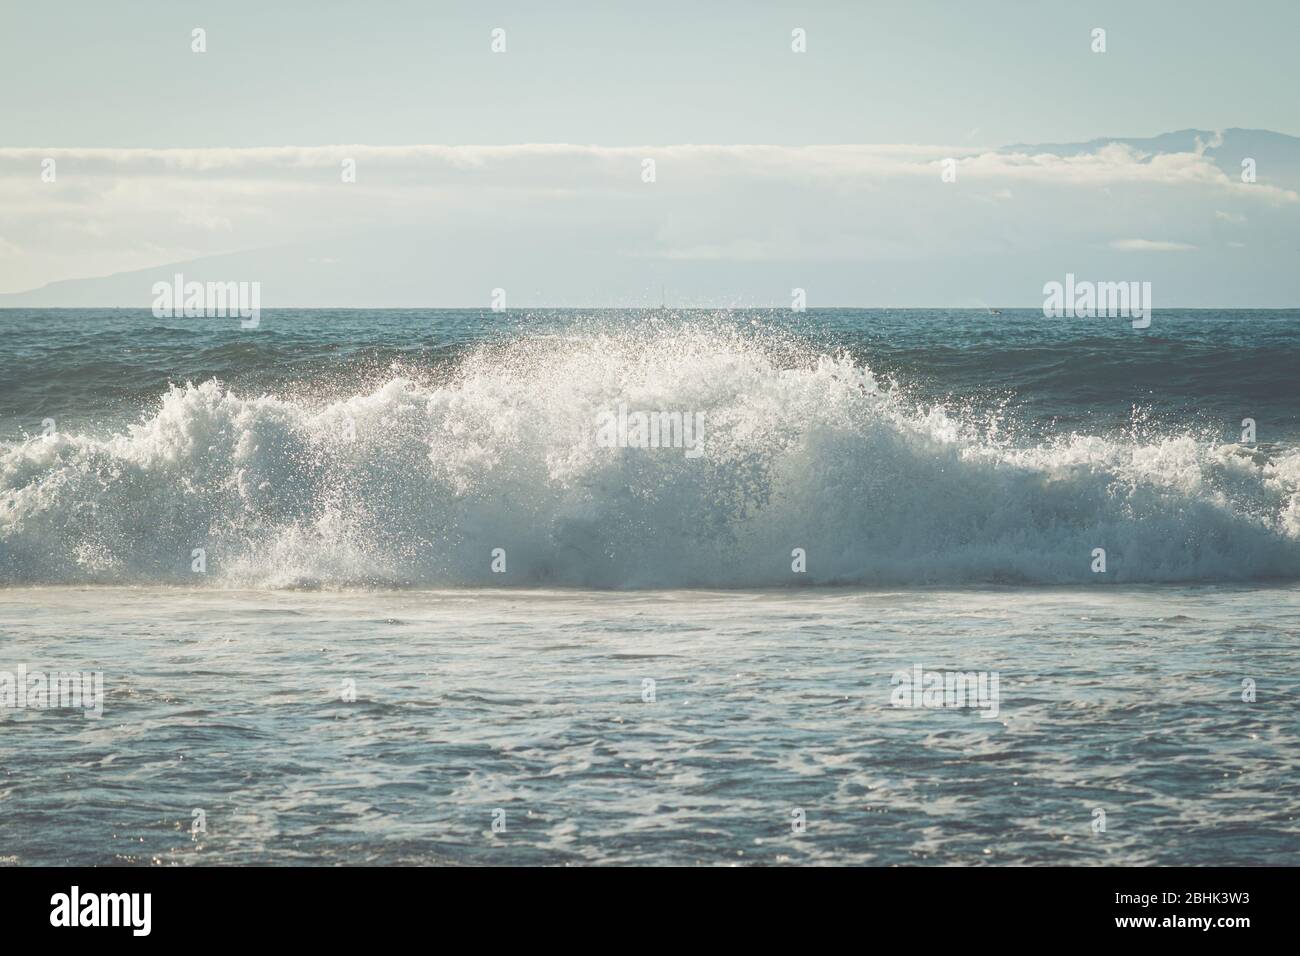 A single powerful wave crashing in the sea or ocean Stock Photo